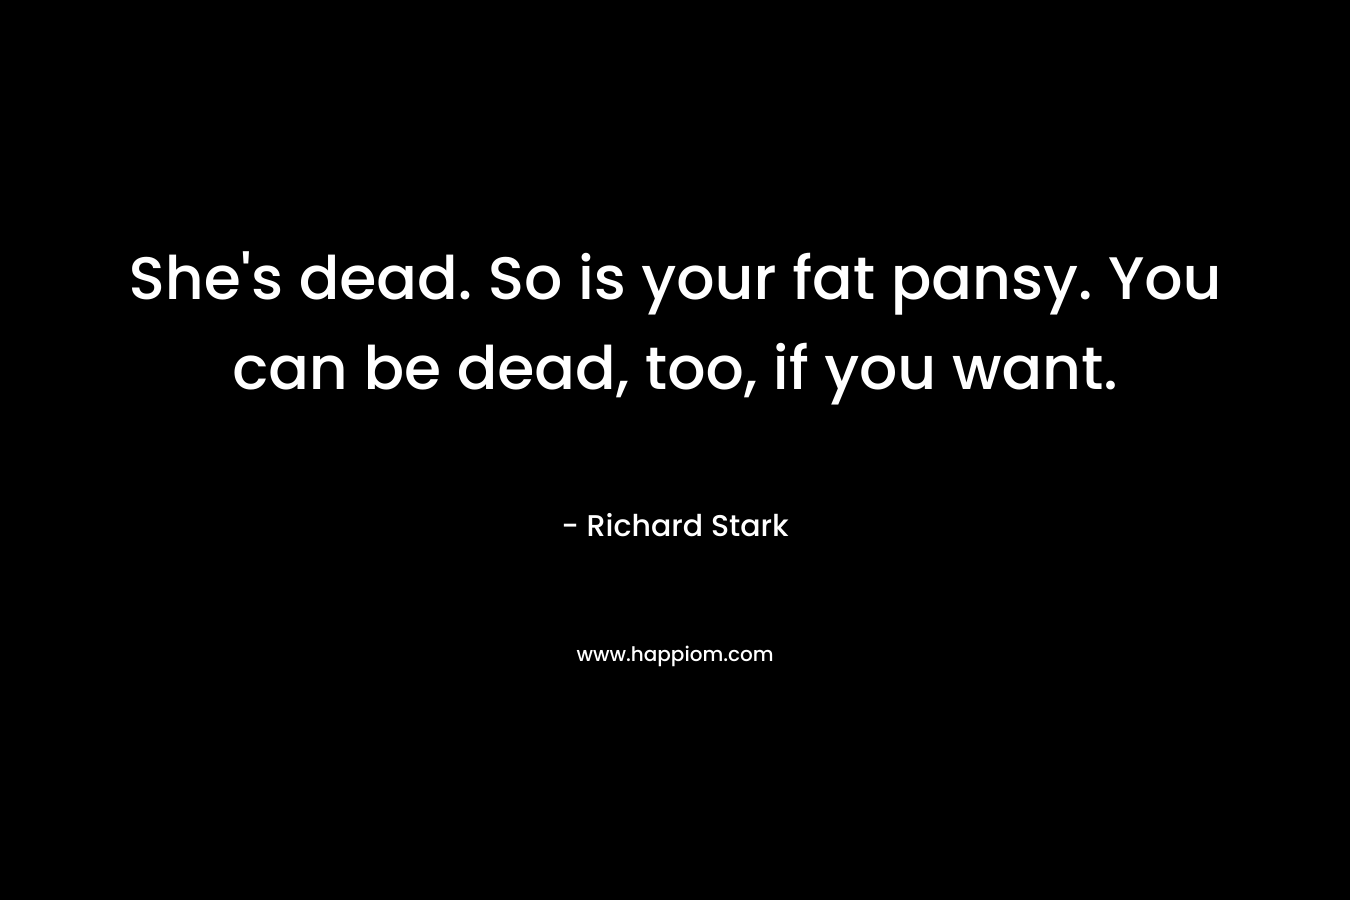 She's dead. So is your fat pansy. You can be dead, too, if you want.